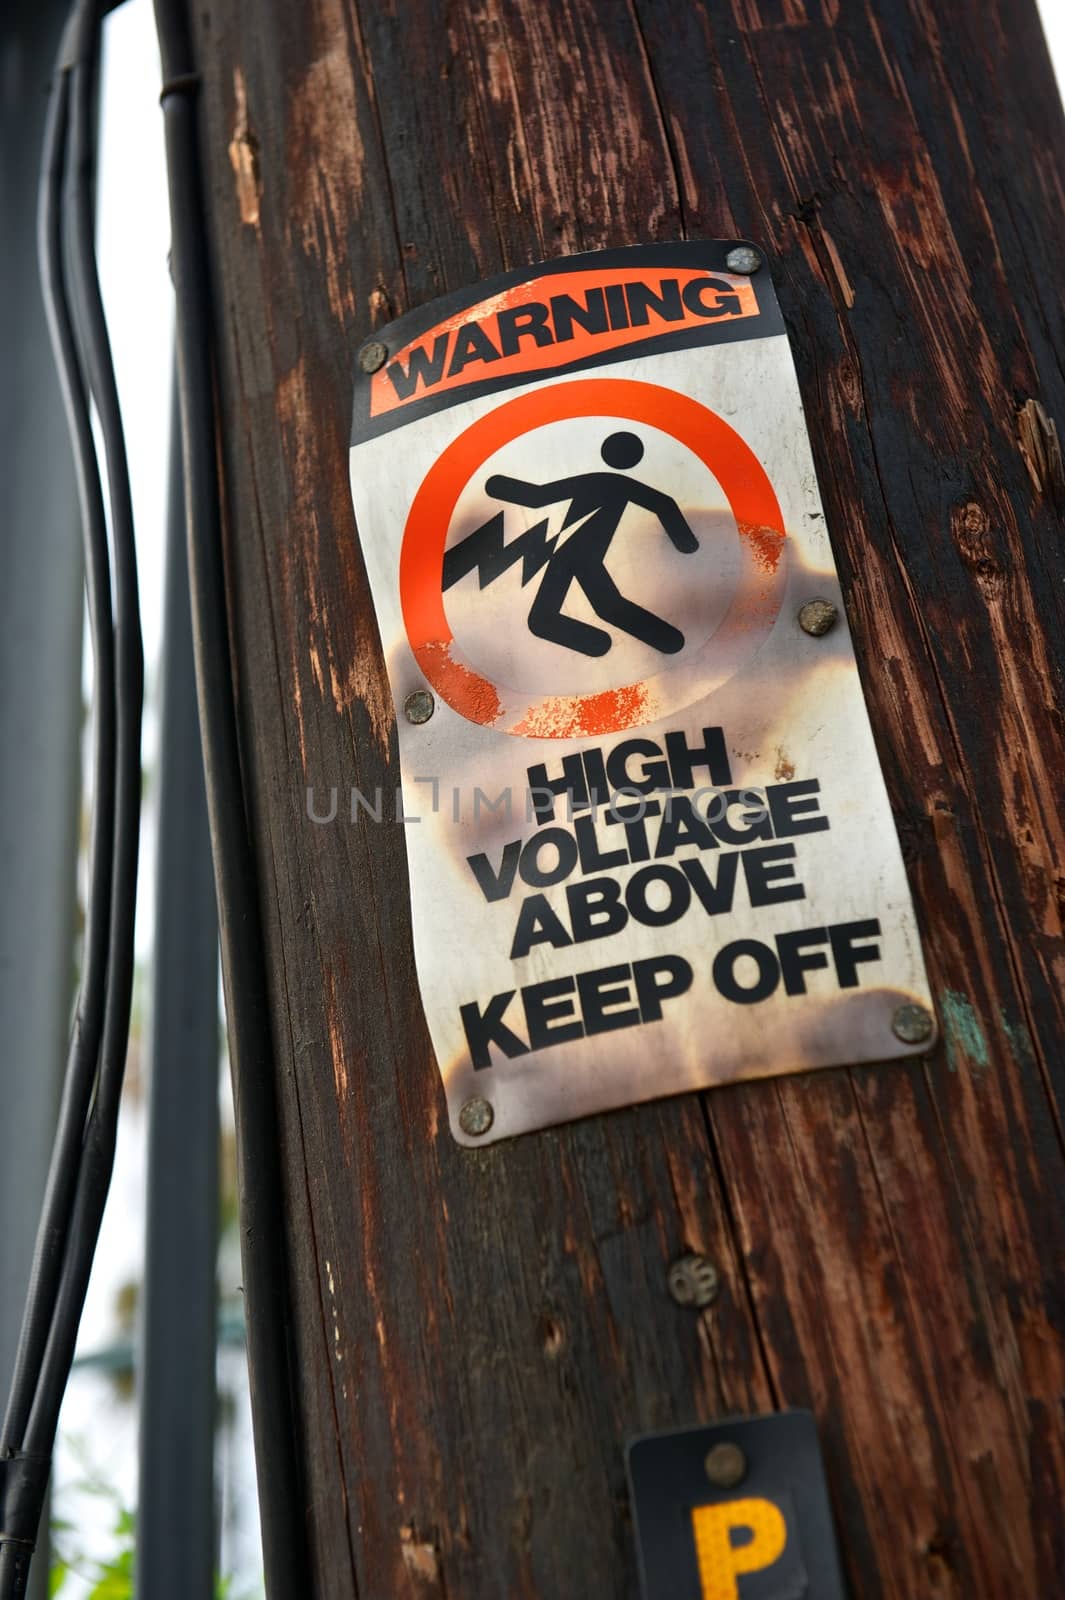 Damaged and blackened warning sign with High Voltage Above and Keep Off posted on an old telephone pole